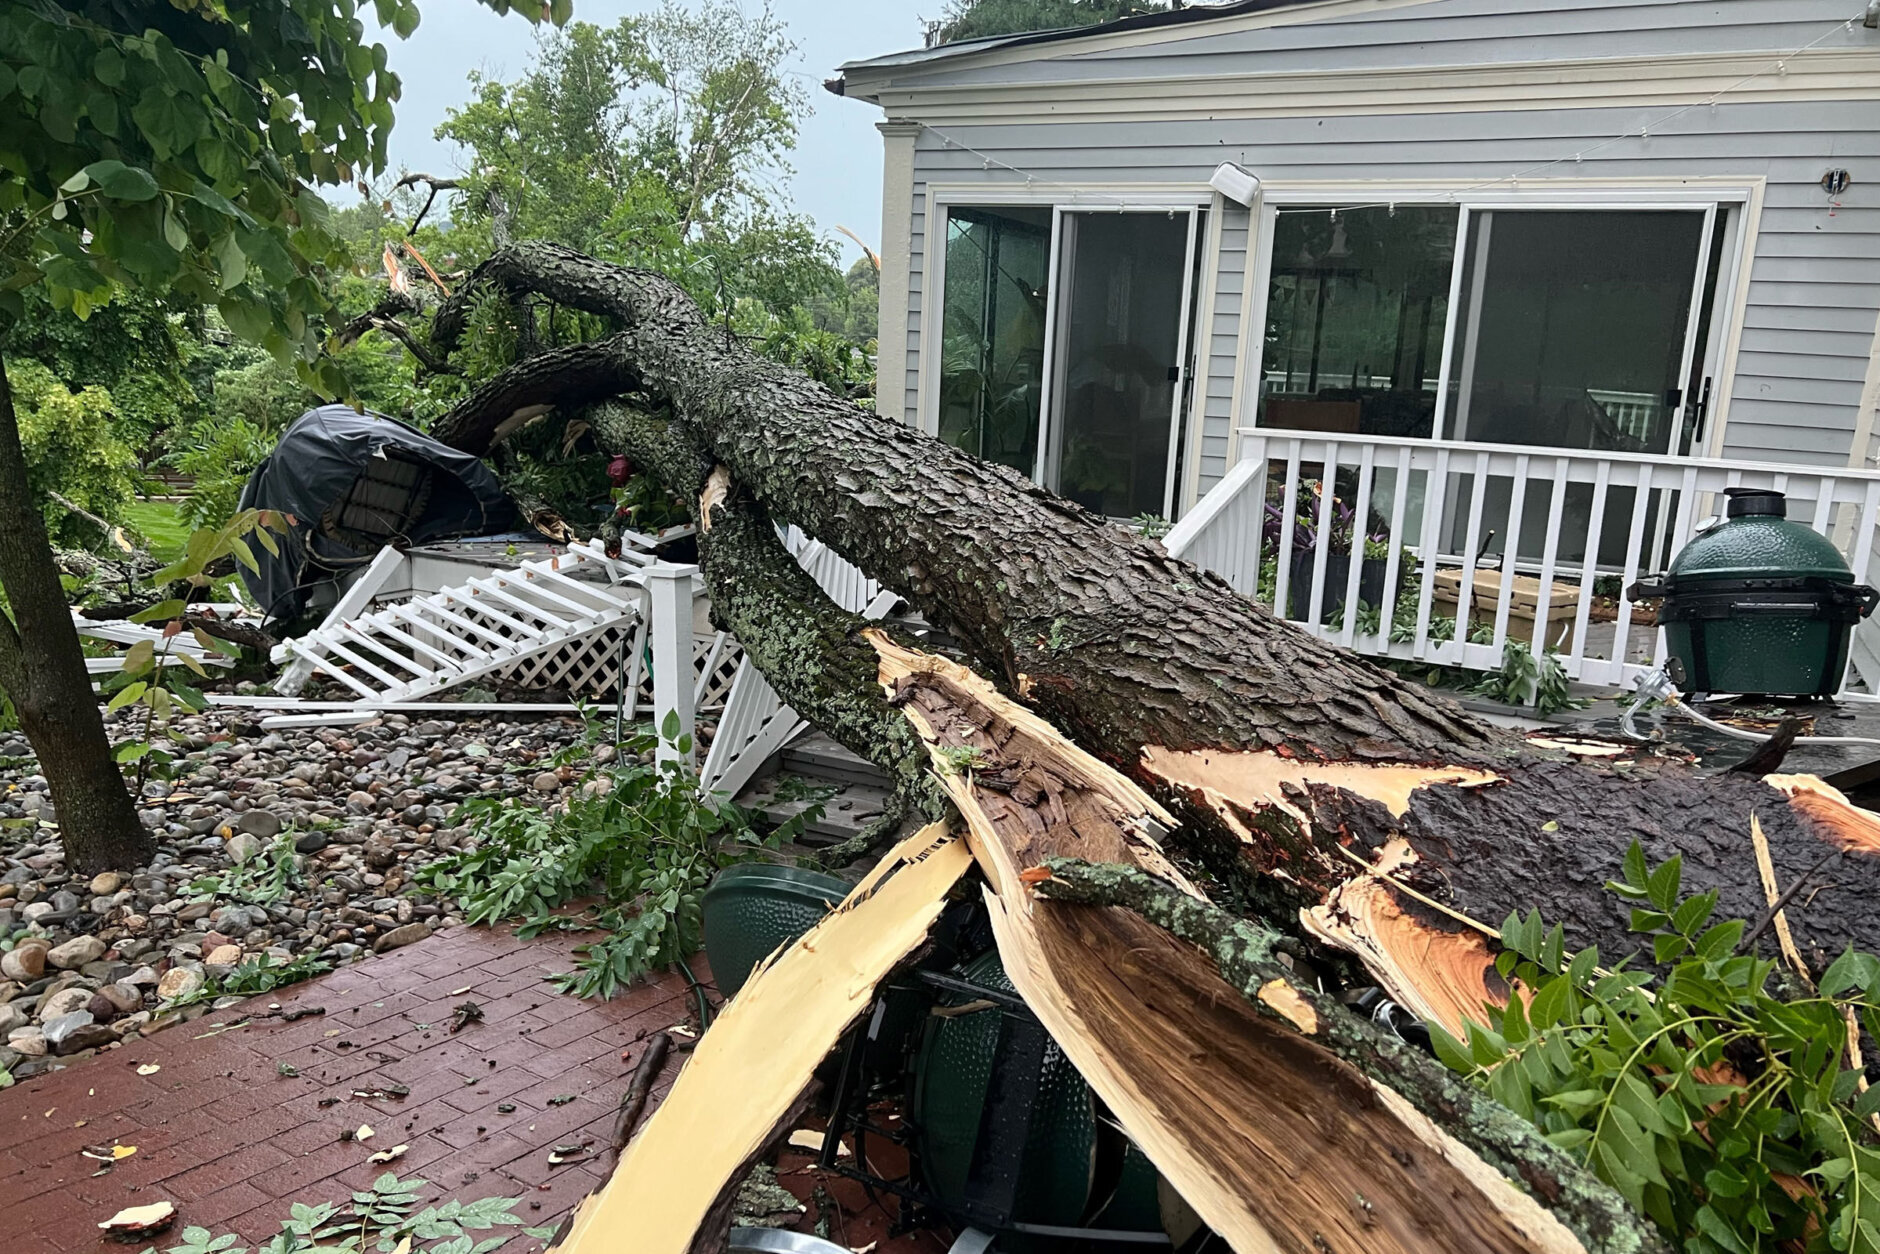 <h3>Warrenton downburst destruction</h3>
<p>Winds of 80 to 90 miles per hour are uncommon in the Mid-Atlantic, but a <a href="https://wtop.com/weather-news/2022/06/strong-storms-pose-flood-wind-threat-to-dc-region-wednesday/">destructive summer thunderstorm</a> bellowed gusts estimated within this range. The storm ransacked parts of Virginia&#8217;s Fauquier and Culpeper counties on the afternoon of June 22.</p>
<p>The downburst plowed southbound from Marshall through Warrenton, acting as a blender as it pulverizing leaves and sent light-weight objects airborne. The National Weather Service collected reports of hundreds of downed trees, many crashing into homes. Initially, three structure collapses were reported in west-central Fauquier County.</p>
<p>Weather Service radar estimated wind speeds in excess of 90 miles per hour.</p>
<p>Damage to the power grid was described as &#8220;catastrophic&#8221; and &#8220;widespread.&#8221; Thousands were <a href="https://wtop.com/weather-news/2022/06/power-outages-follow-severe-thunderstorms-flooding-through-dc-area/">left in the dark</a> for days.</p>
<p>Another powerful thunderstorm moved from D.C. toward Fredericksburg that afternoon, intensifying as it caused damage closer to Richmond.</p>
